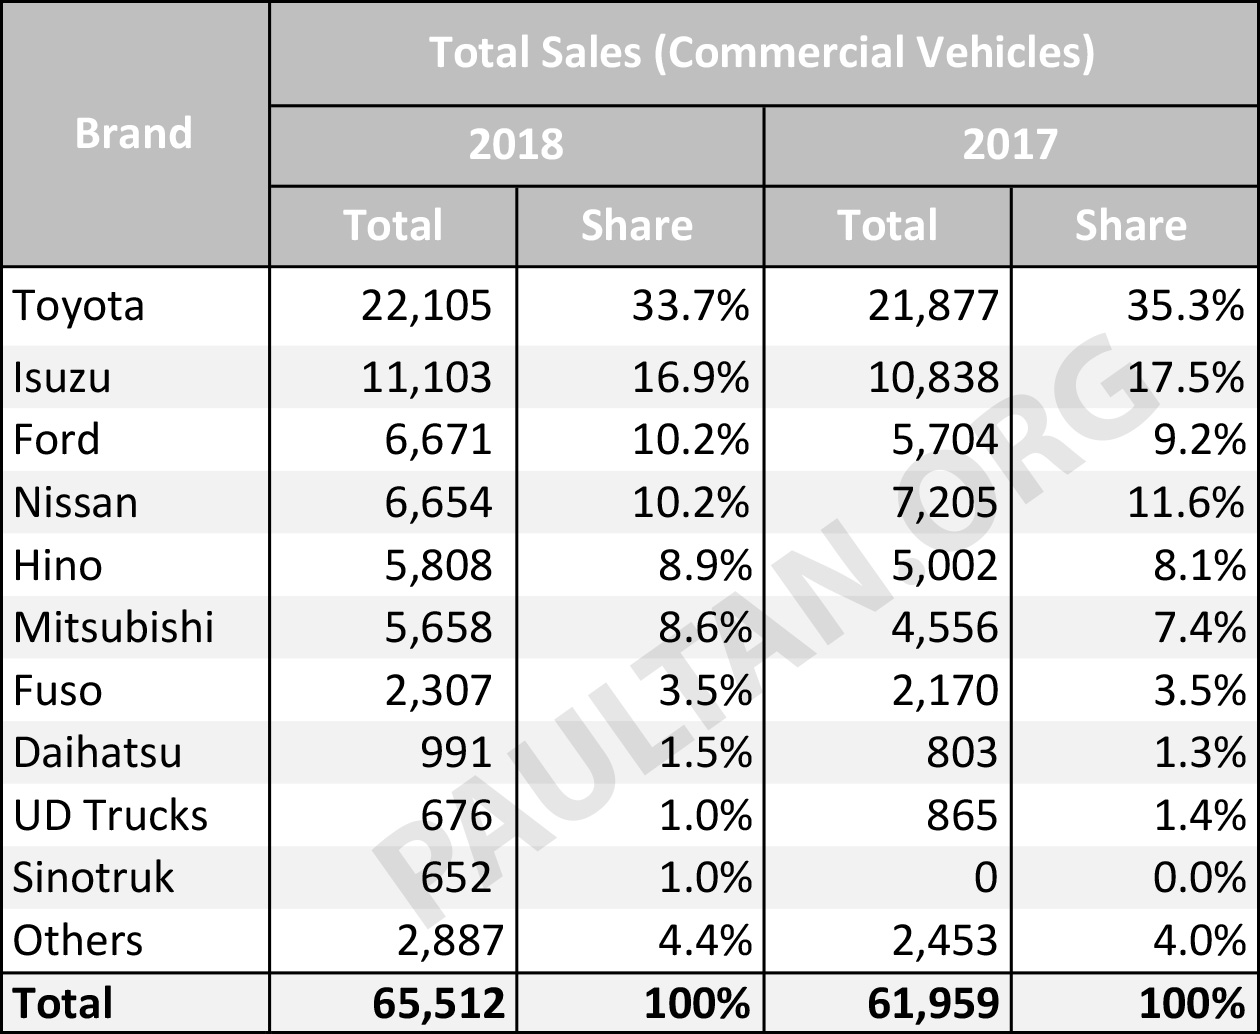 Vehicle sales performance in Malaysia, 2018 vs 2017 - a ...